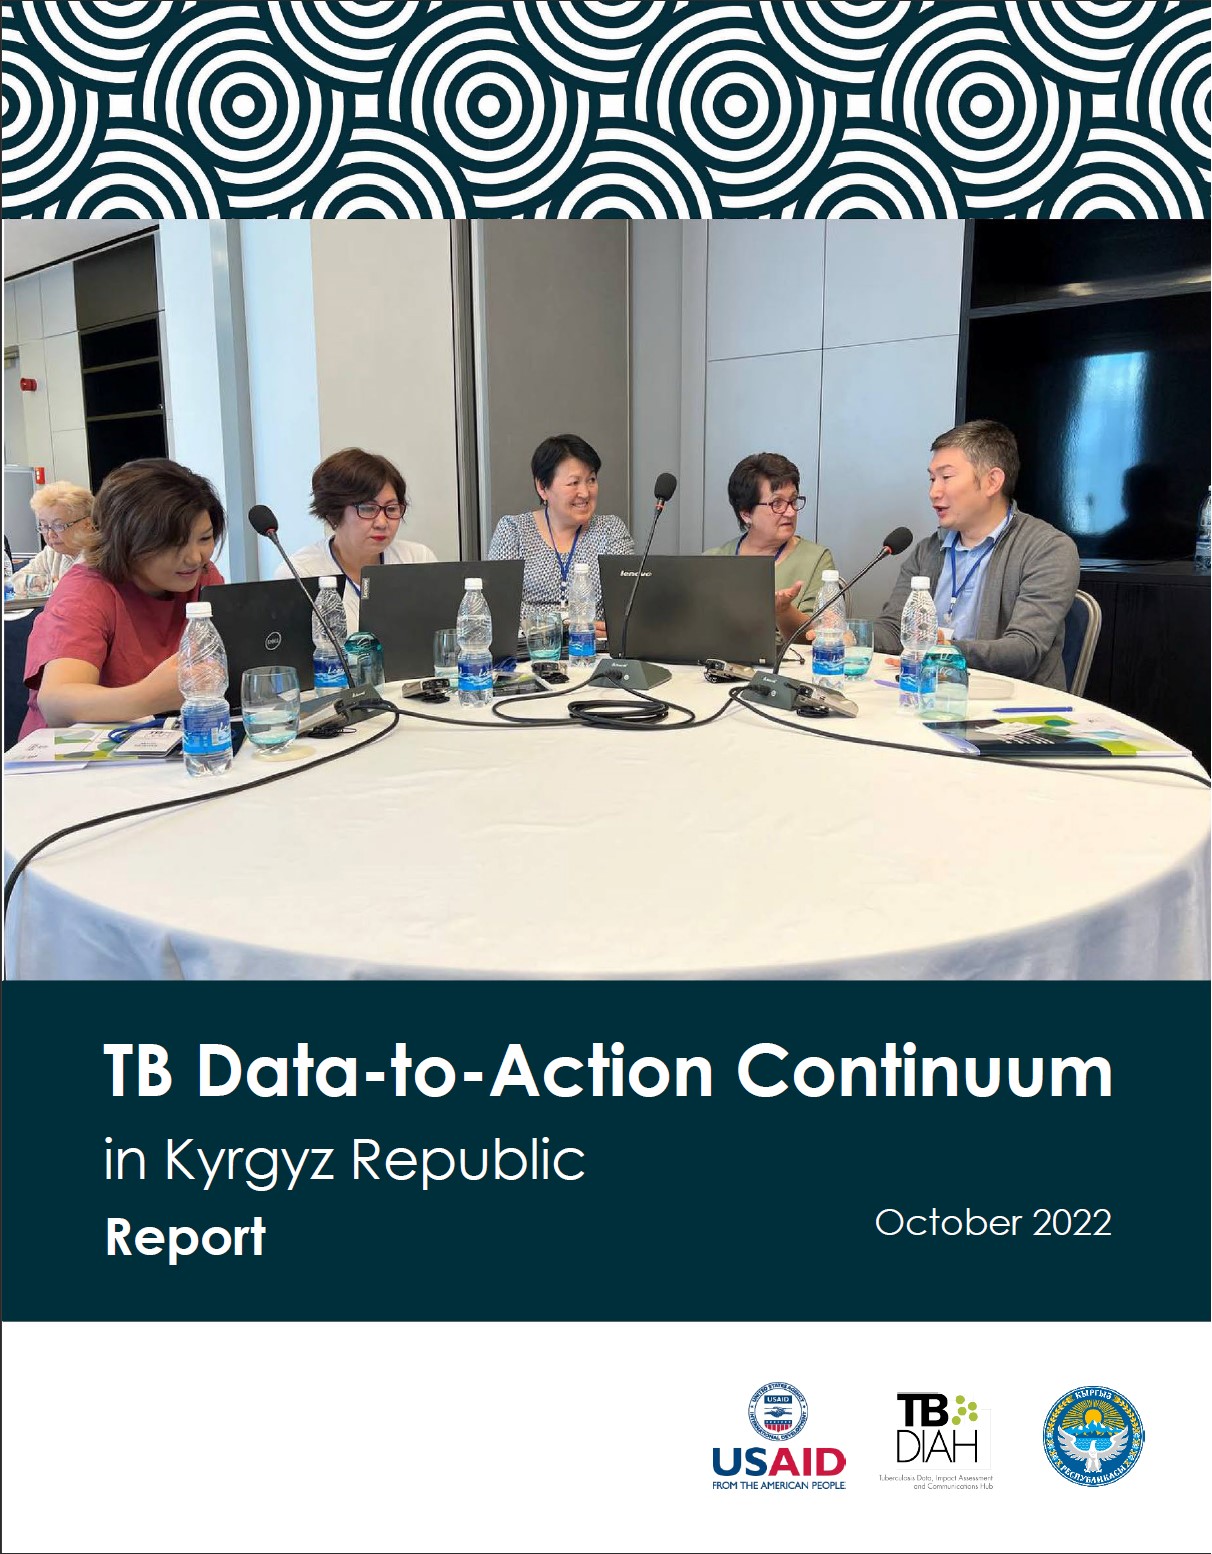 TB Data-to-Action Continuum in Kyrgyz Republic: Report